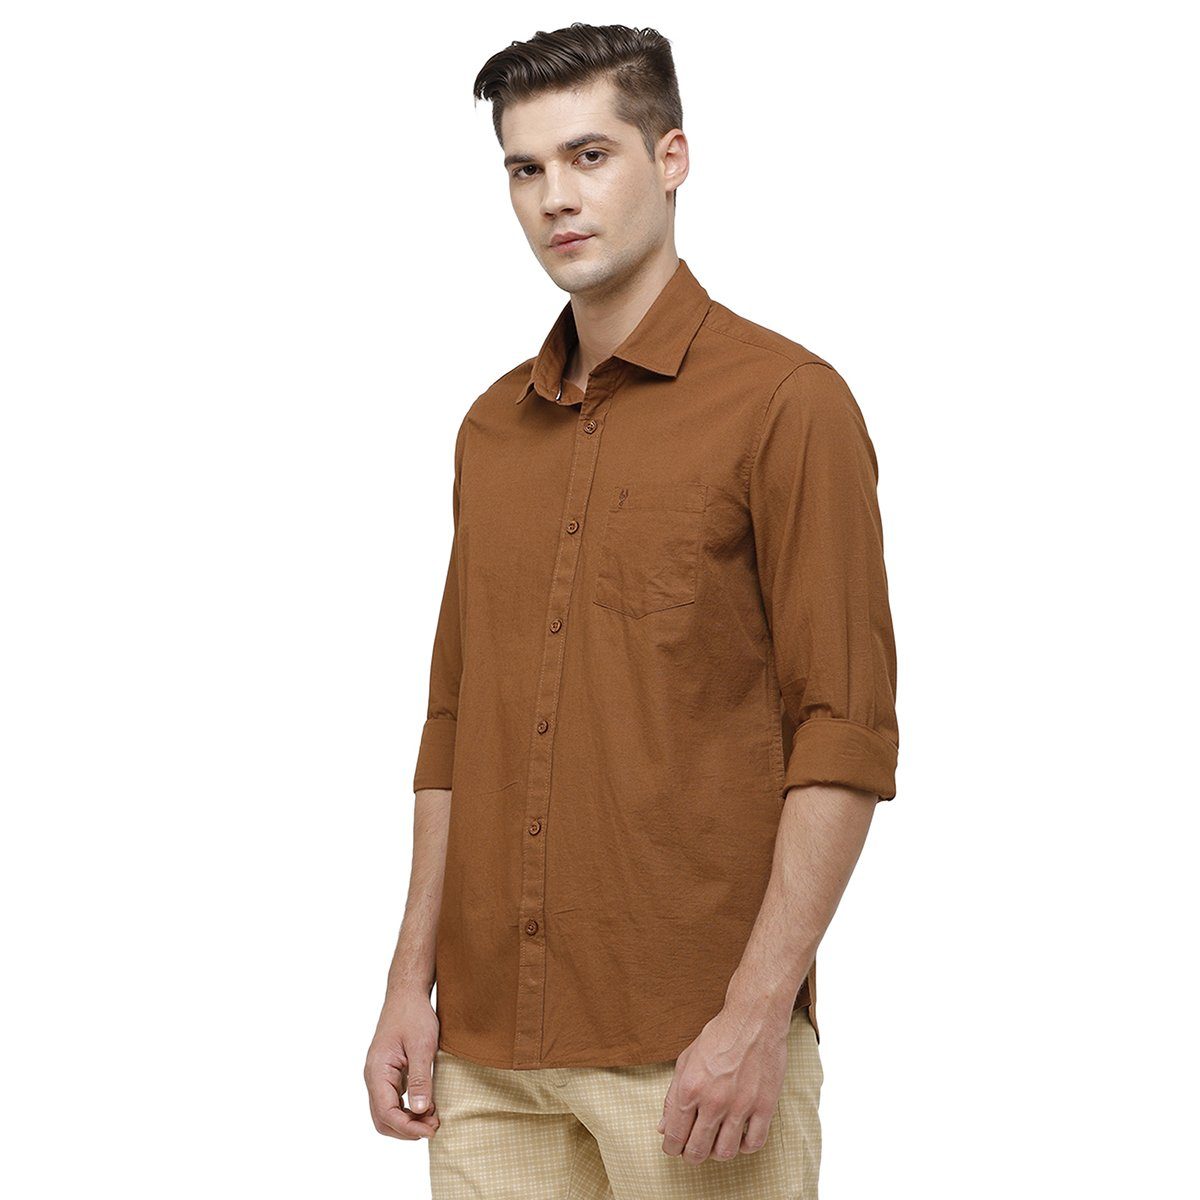 Classic Polo Mens Collar Neck Full Sleeve Brown Smart Fit 100% Cotton Woven Shirt SM1-69 G-FS-SLD-SF Shirts Classic Polo 